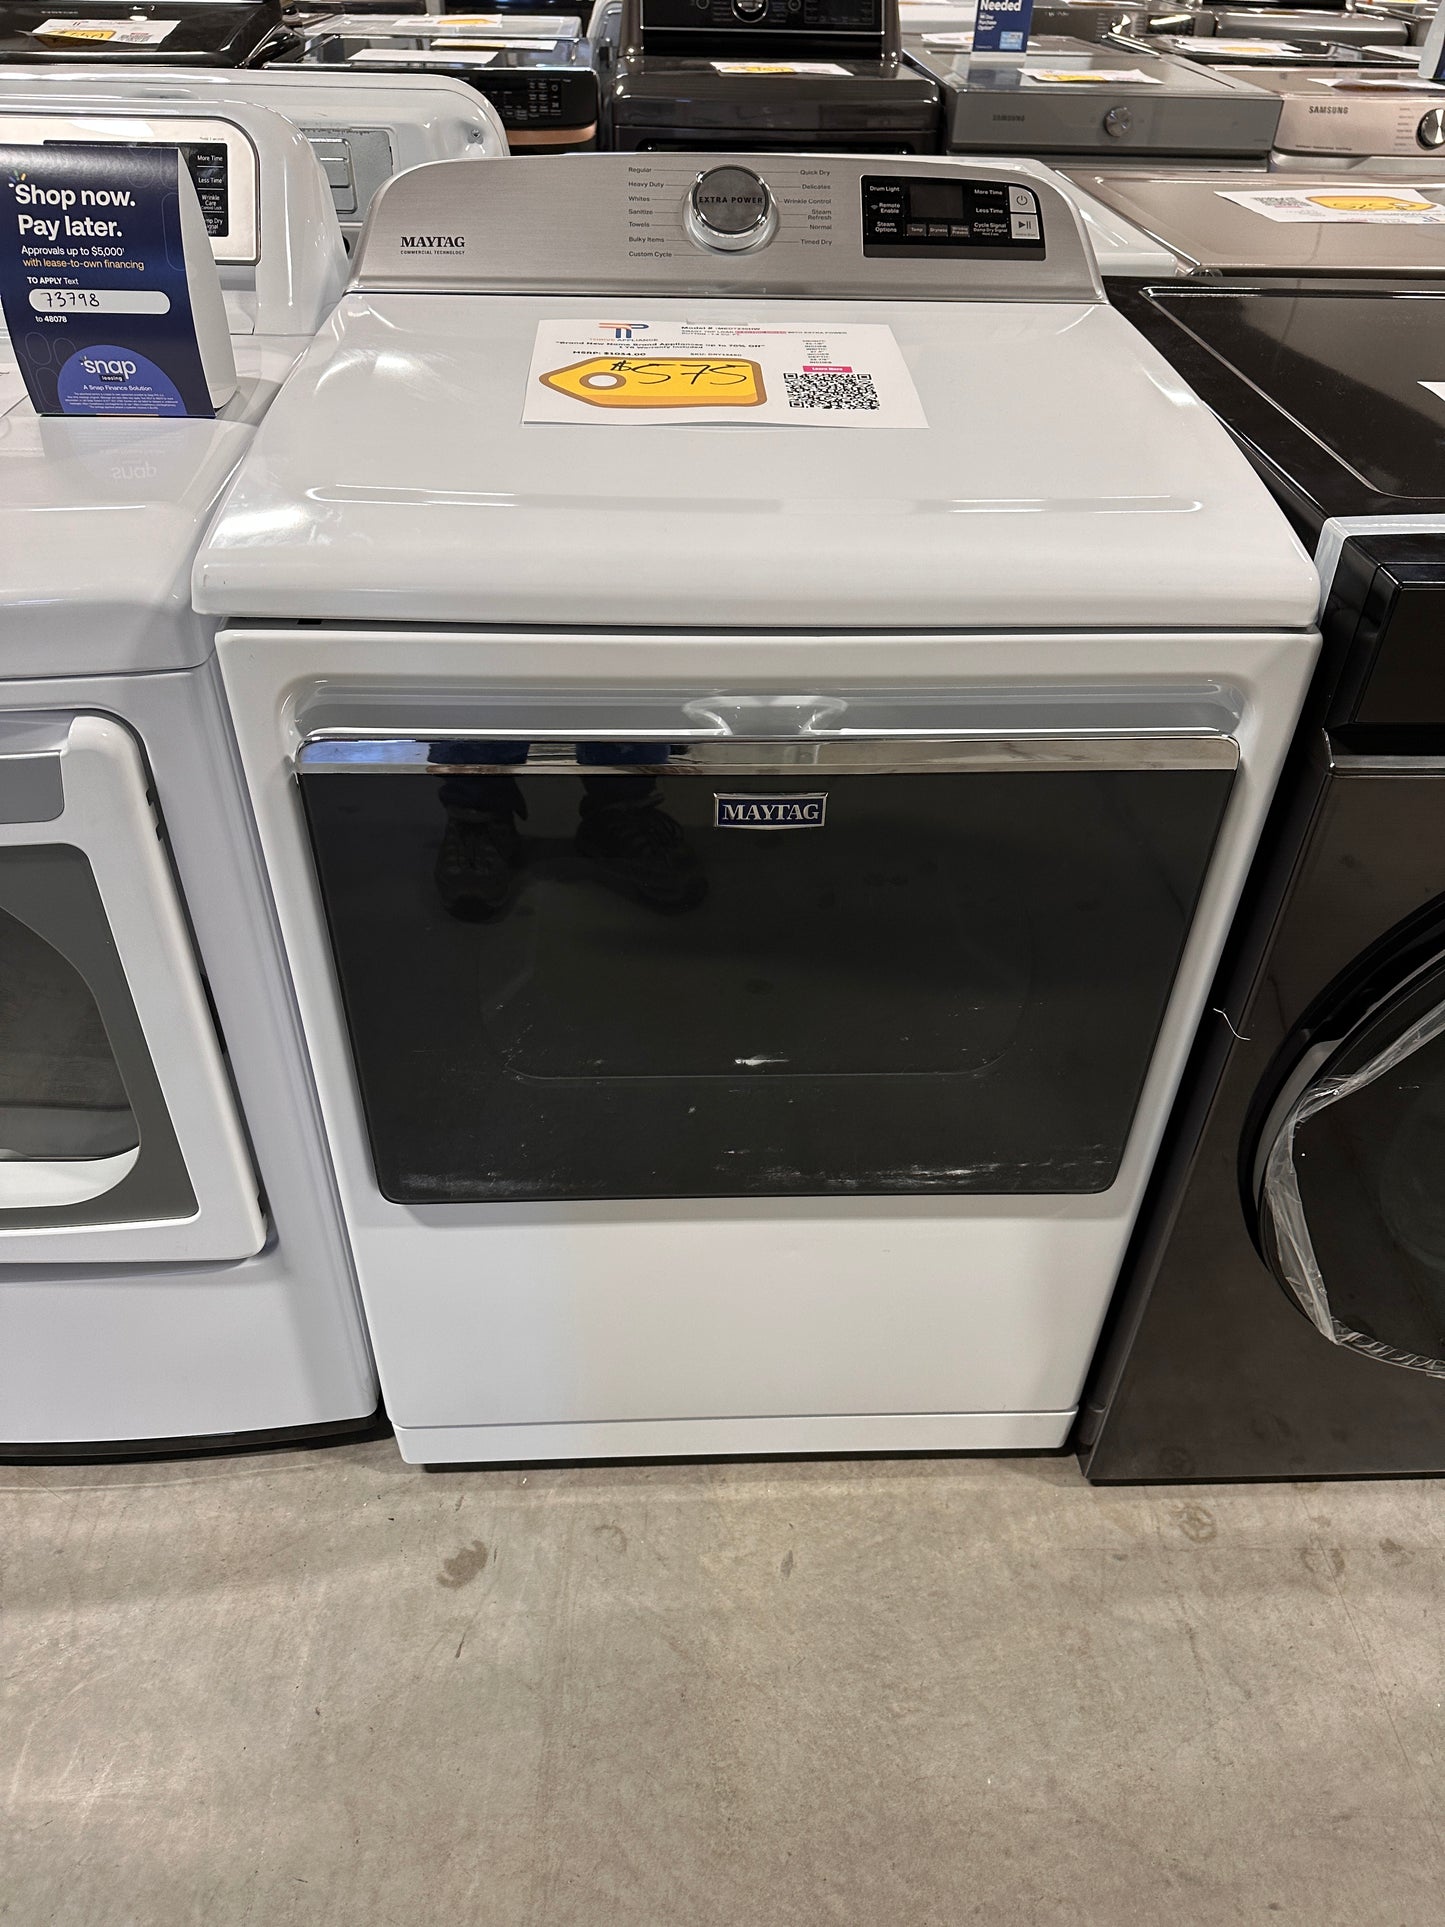 MAYTAG ELECTRIC DRYER WITH STEAM MODEL:MED7230HW  DRY12480